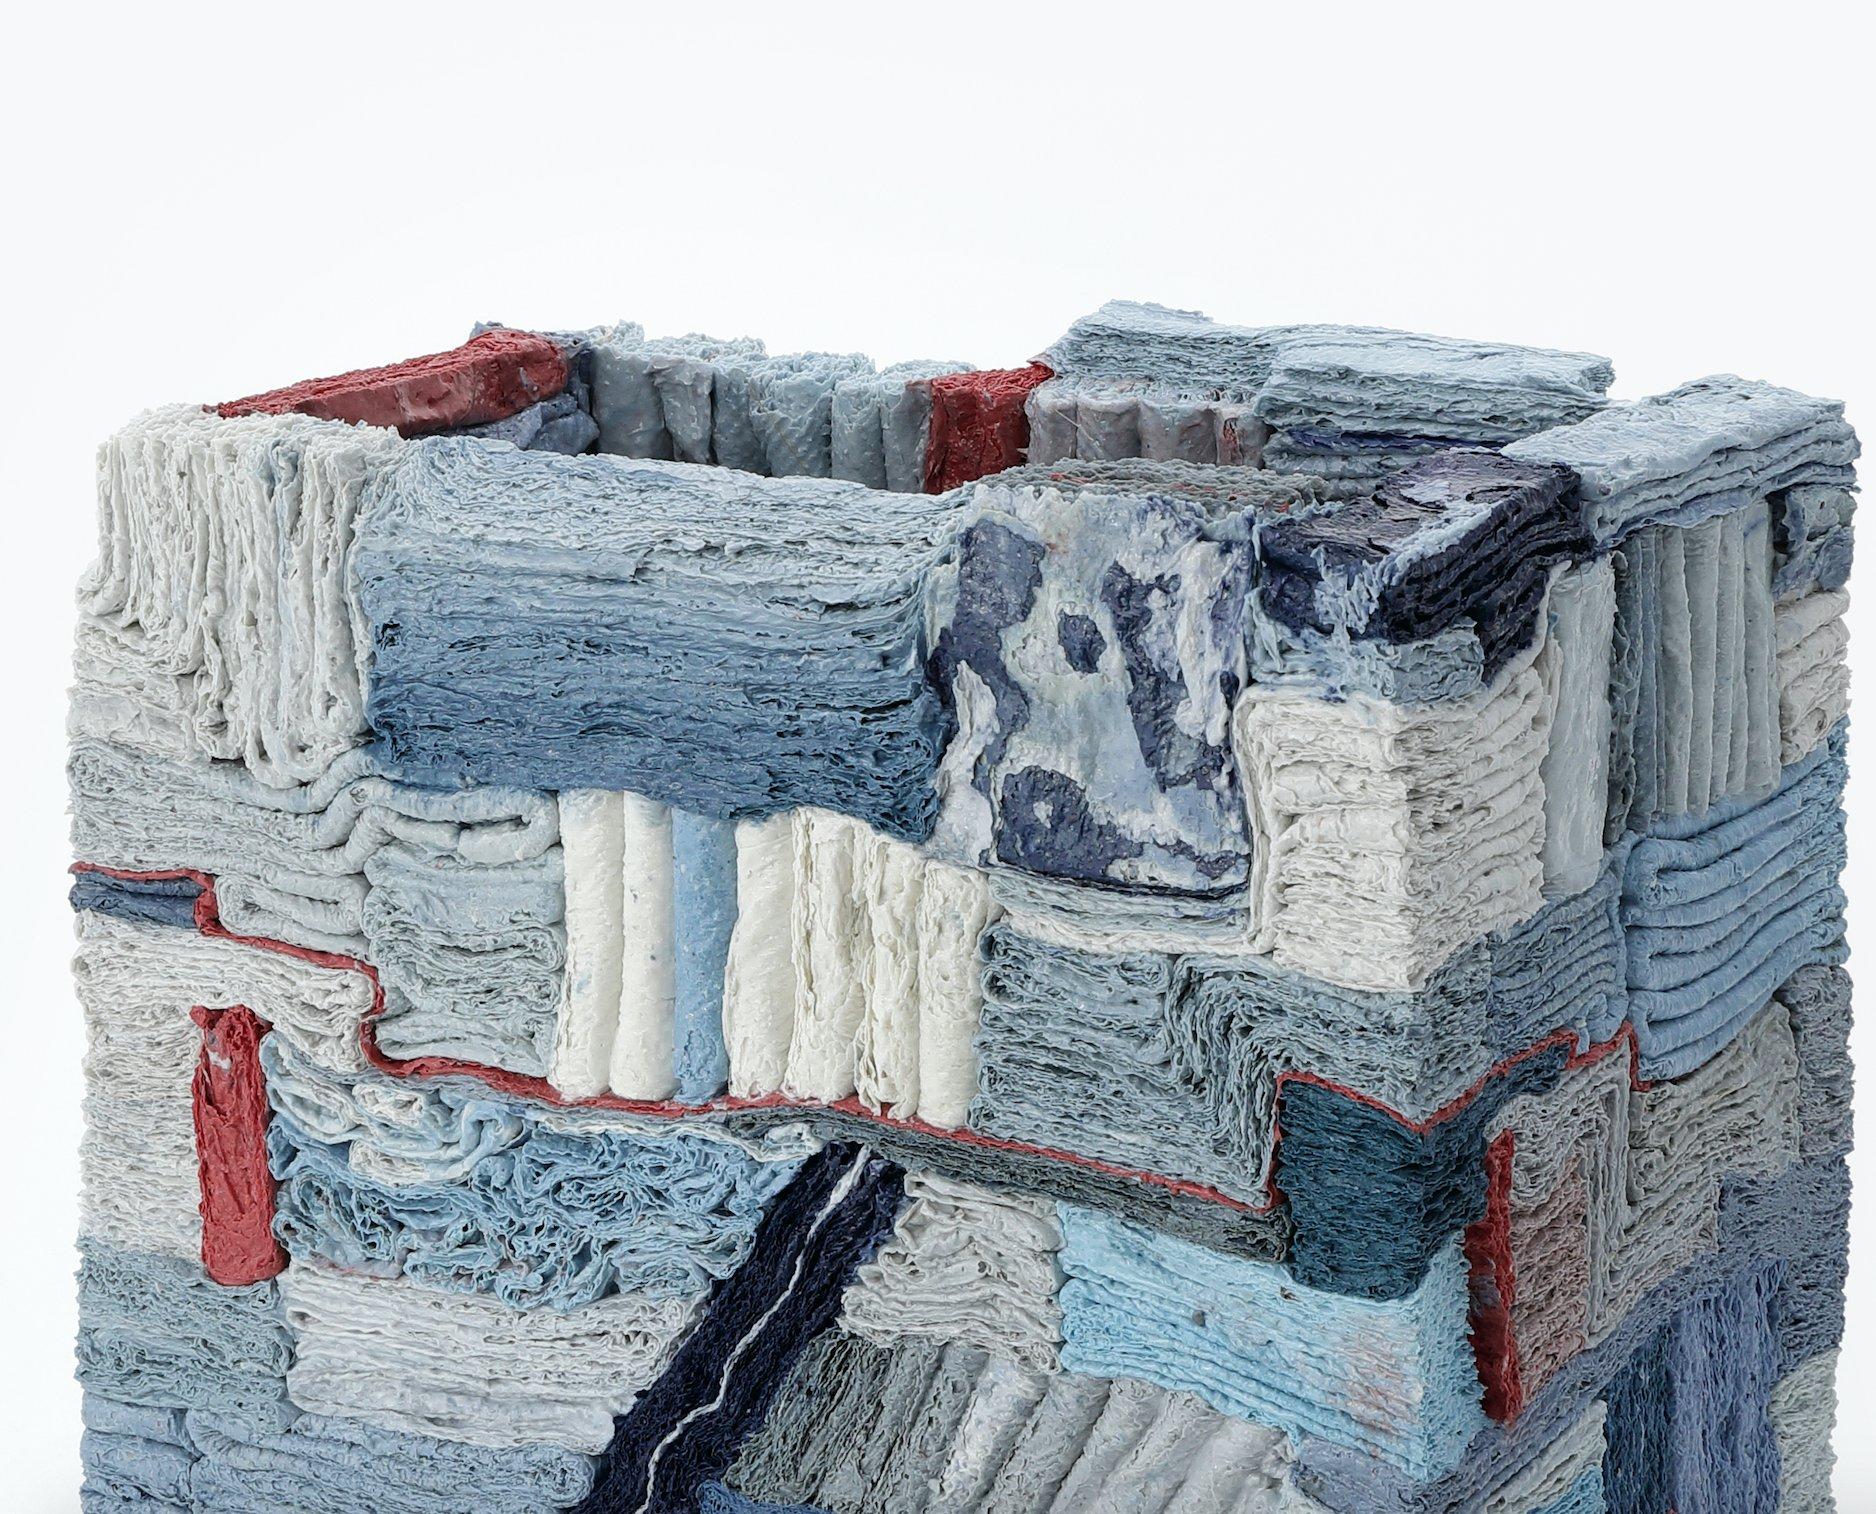 Blue Patchwork, 2023 (Ceramic, C. 11.4 in. h x 9.8 in. w x 6.2 in. d, Object No.: 4203)

The artist harmoniously combines materials that are seemingly at odds with one another to create his sublime vases and sculptural vessels. He paints porcelain